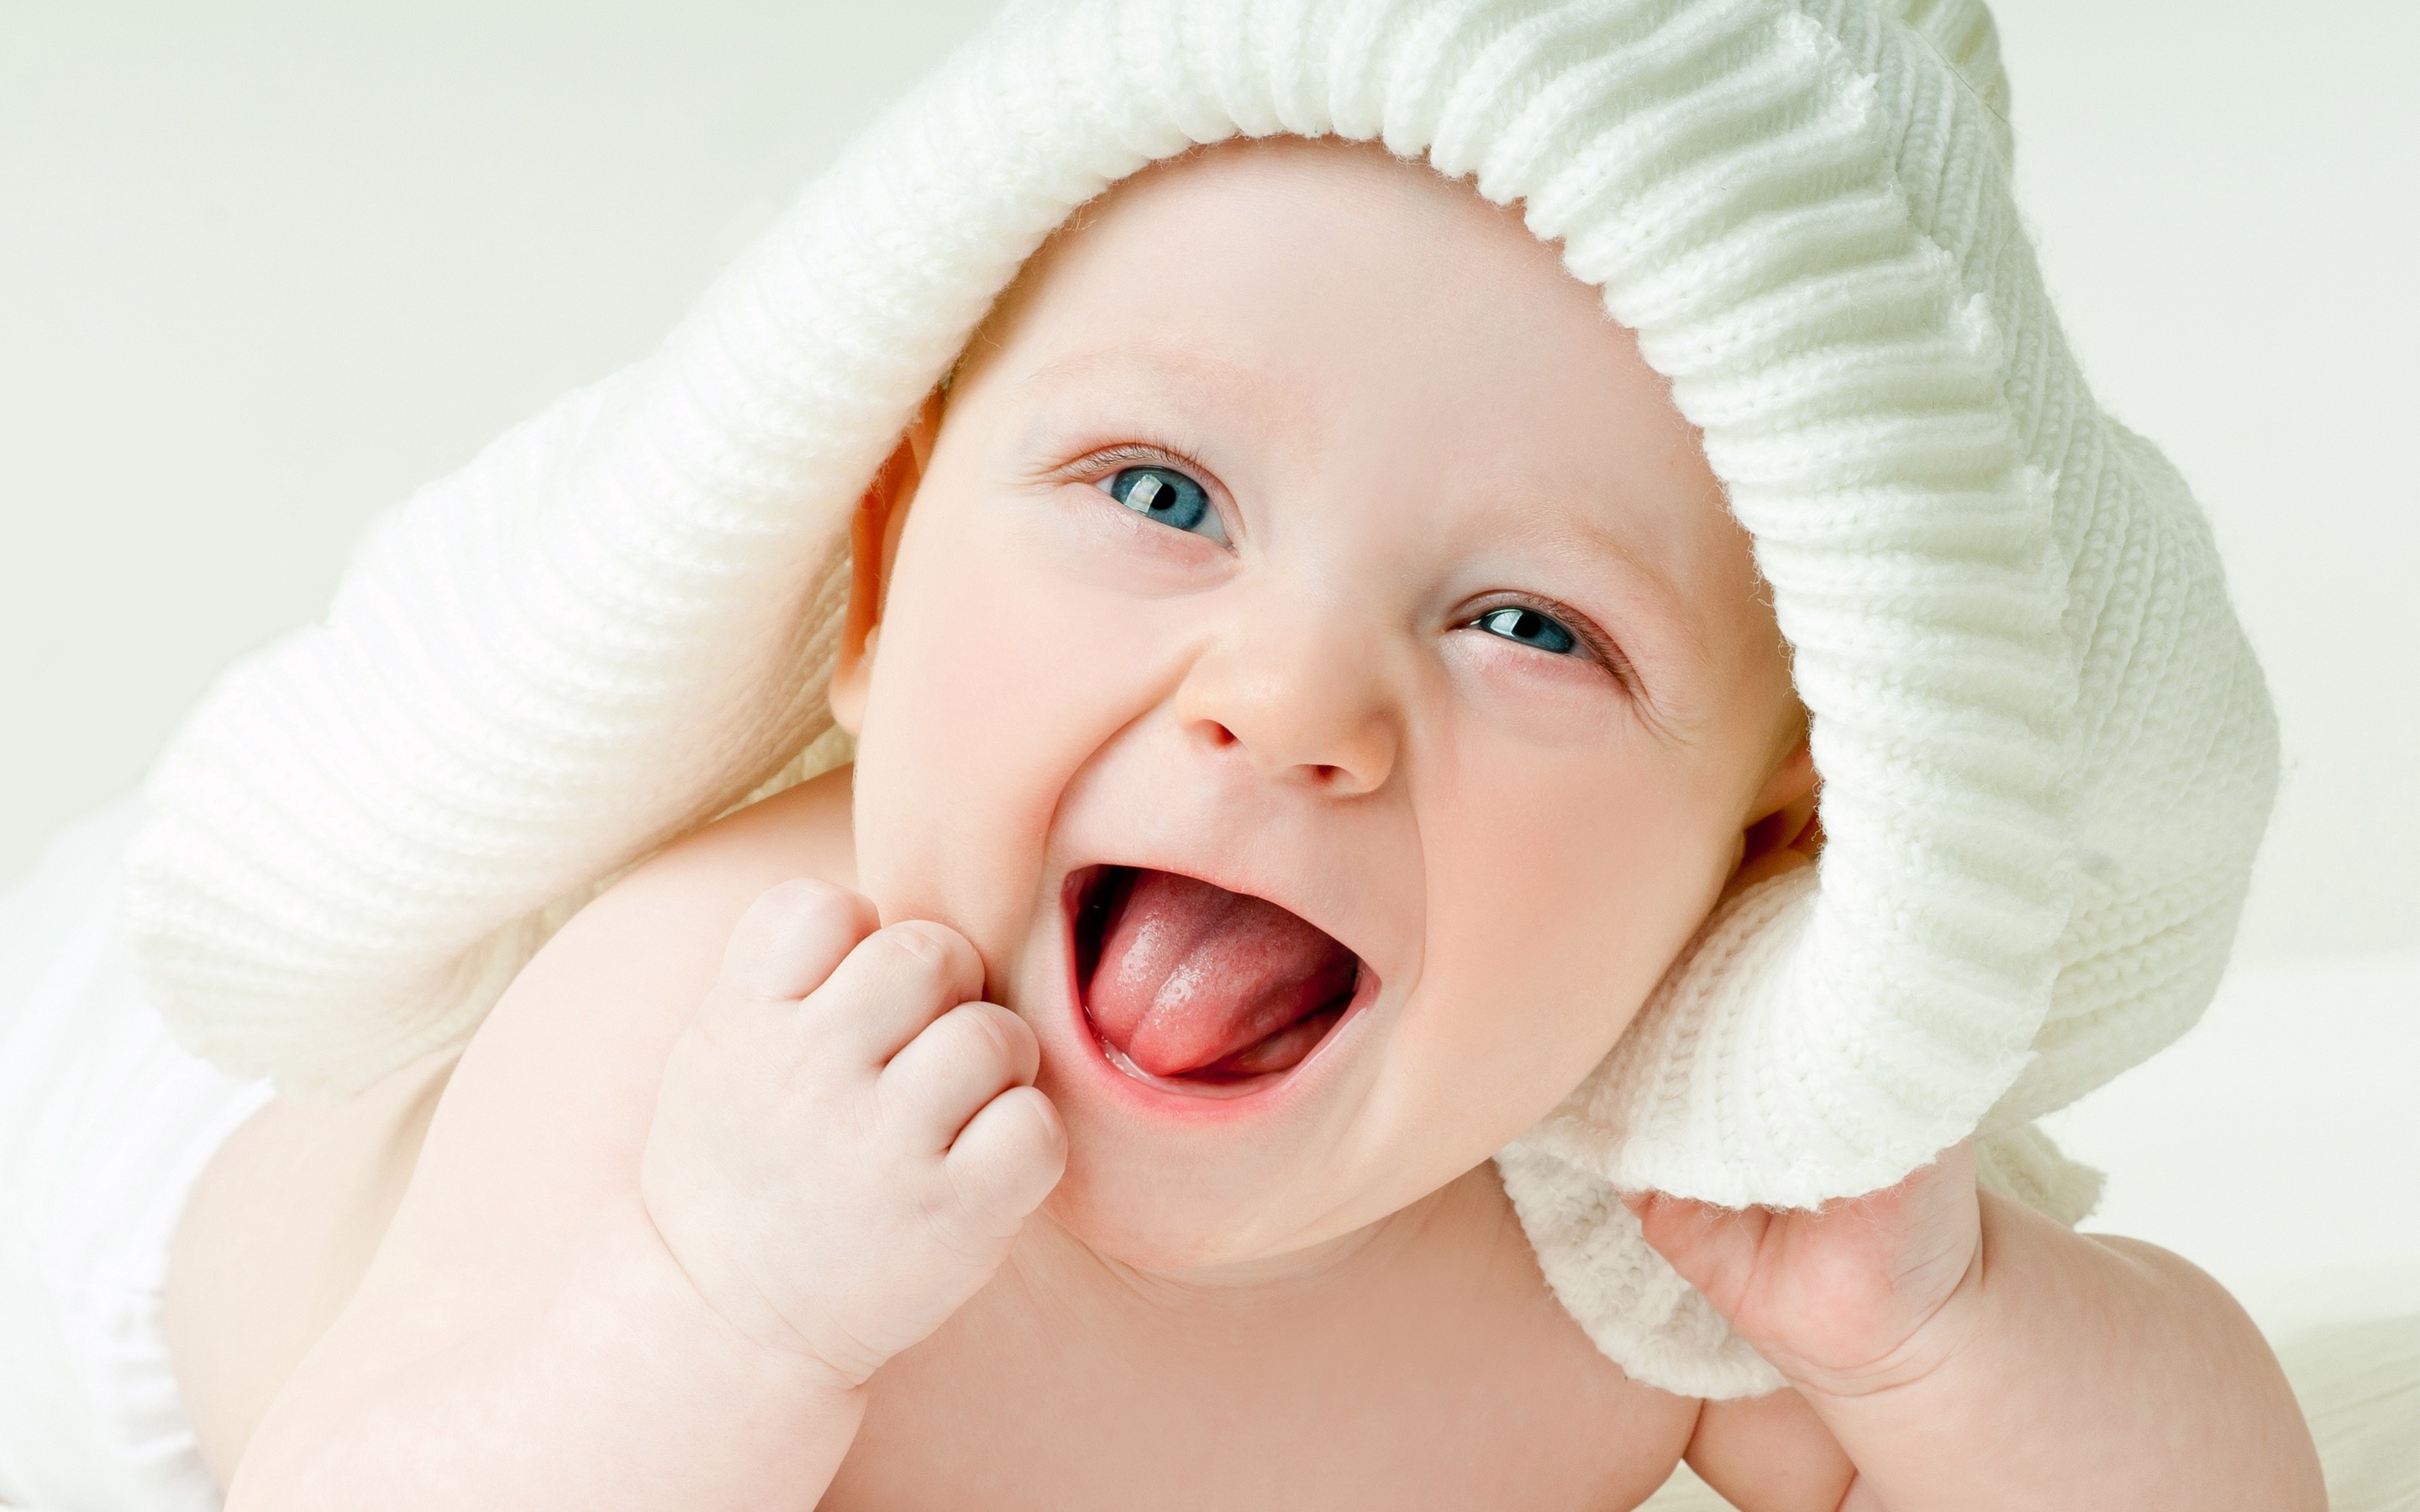 Cute laughing Baby Boy HD Wallpaper   New HD Wallpapers